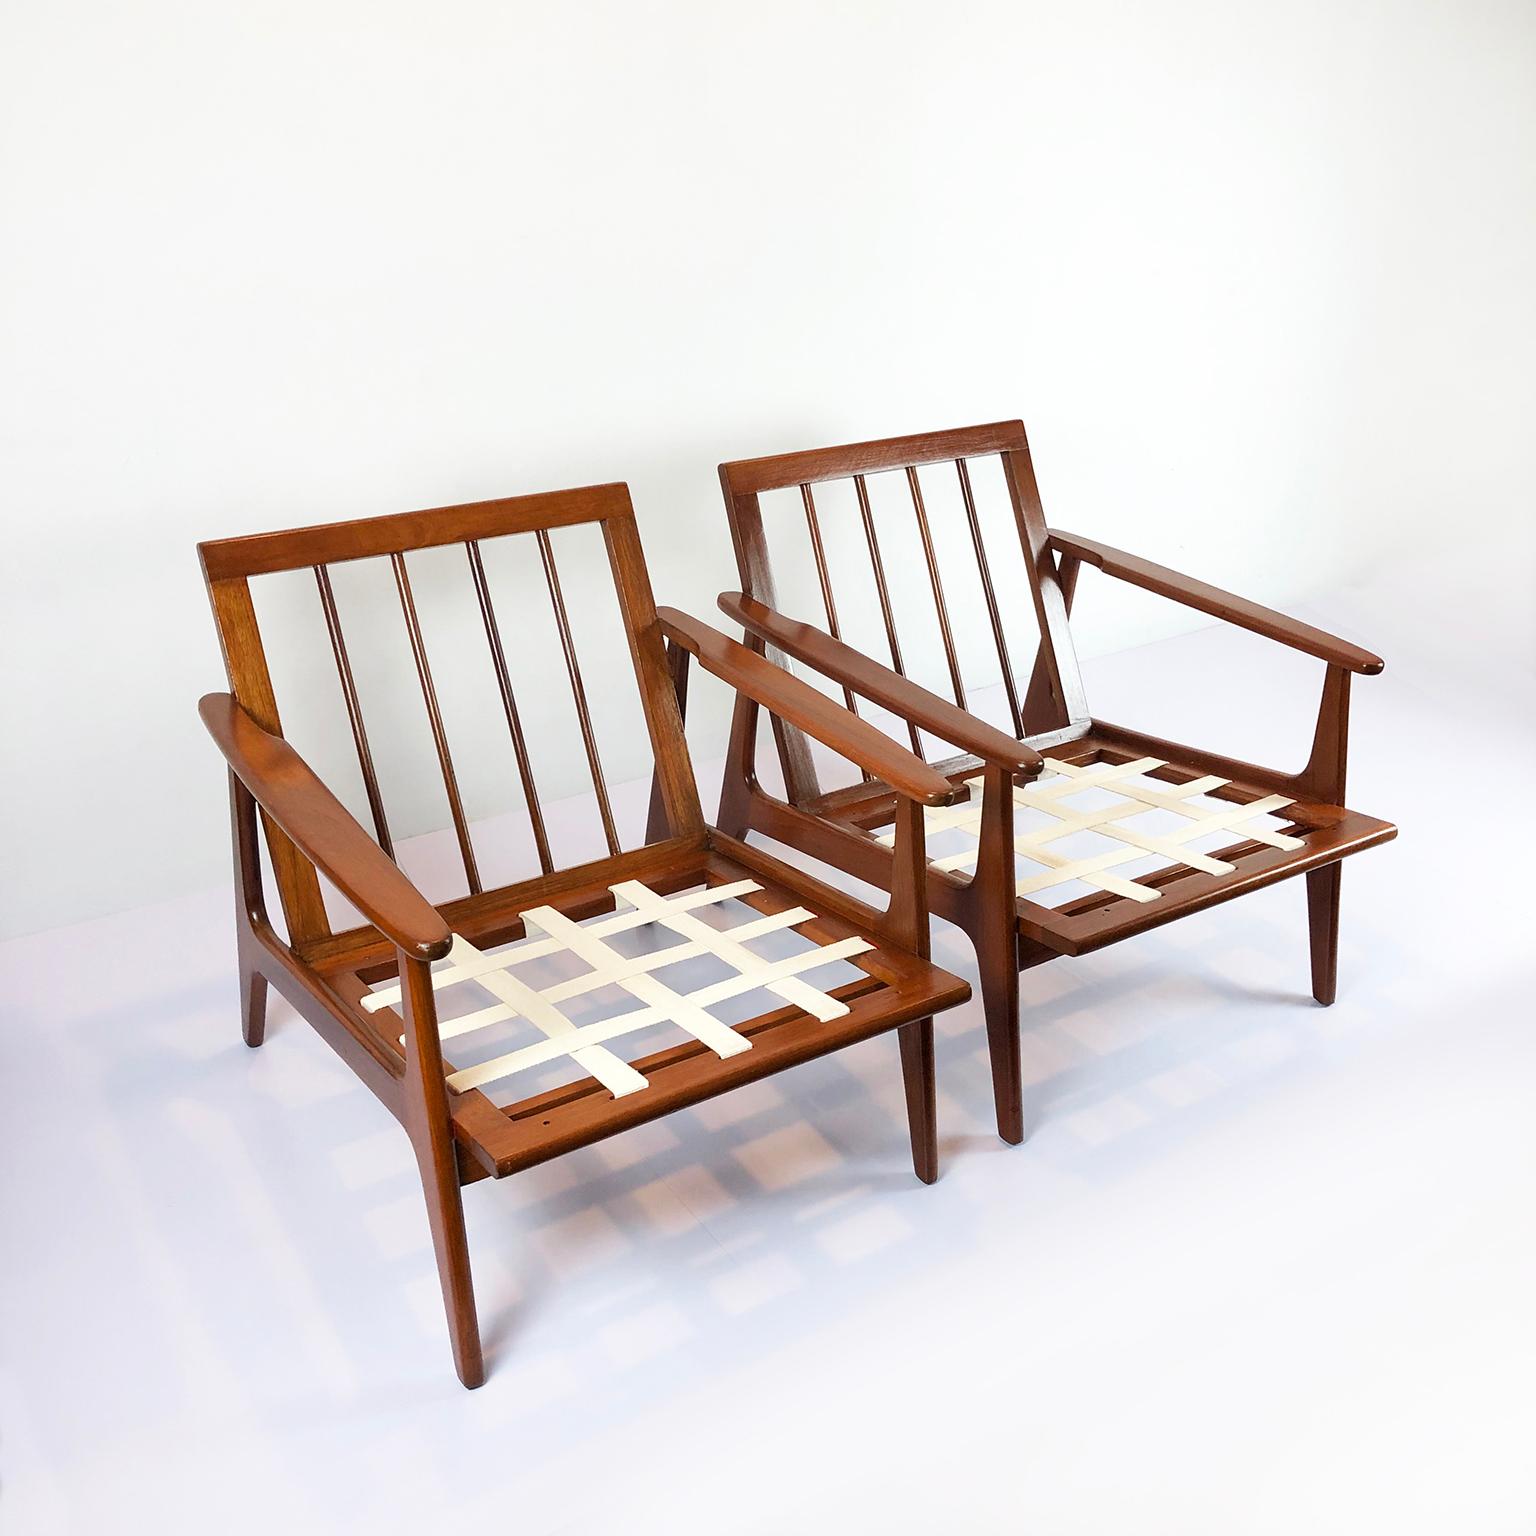 We offer these pair of armchairs in the style of Clara Porset, made in cedar wood and recently restored, circa 1950.